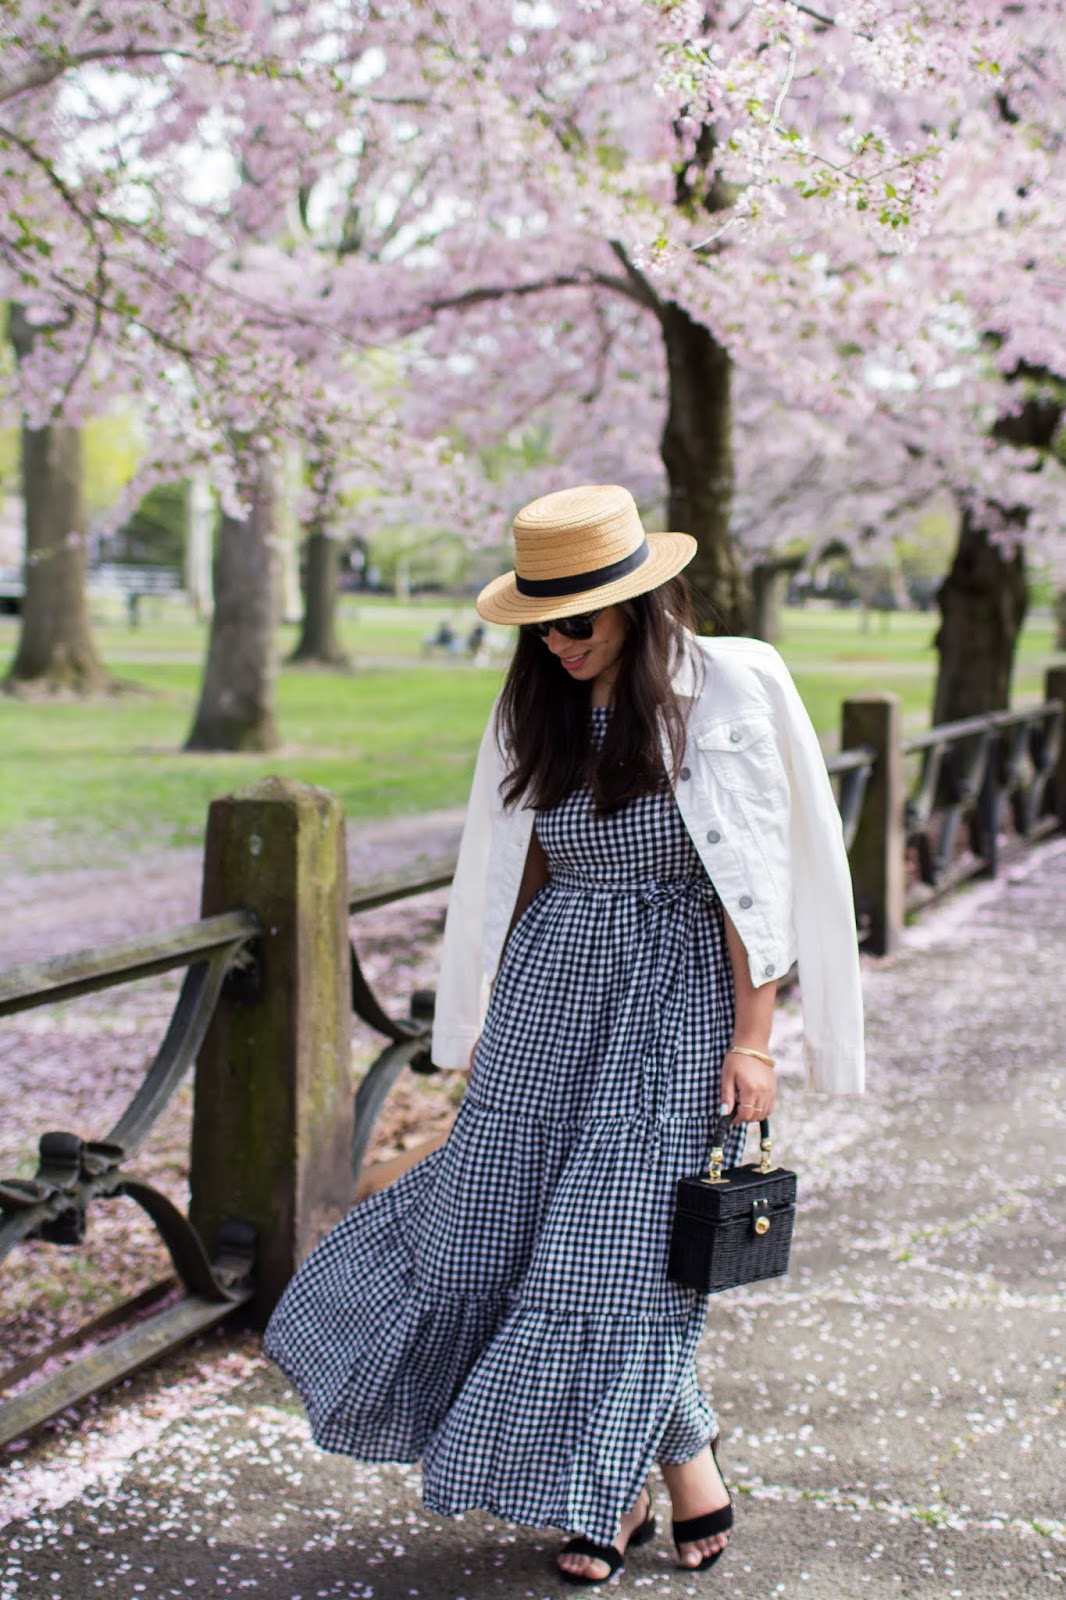 Gingham and Blossoms - Chic on the Cheap  Connecticut based style blogger  on a budget, by Lydia Abate